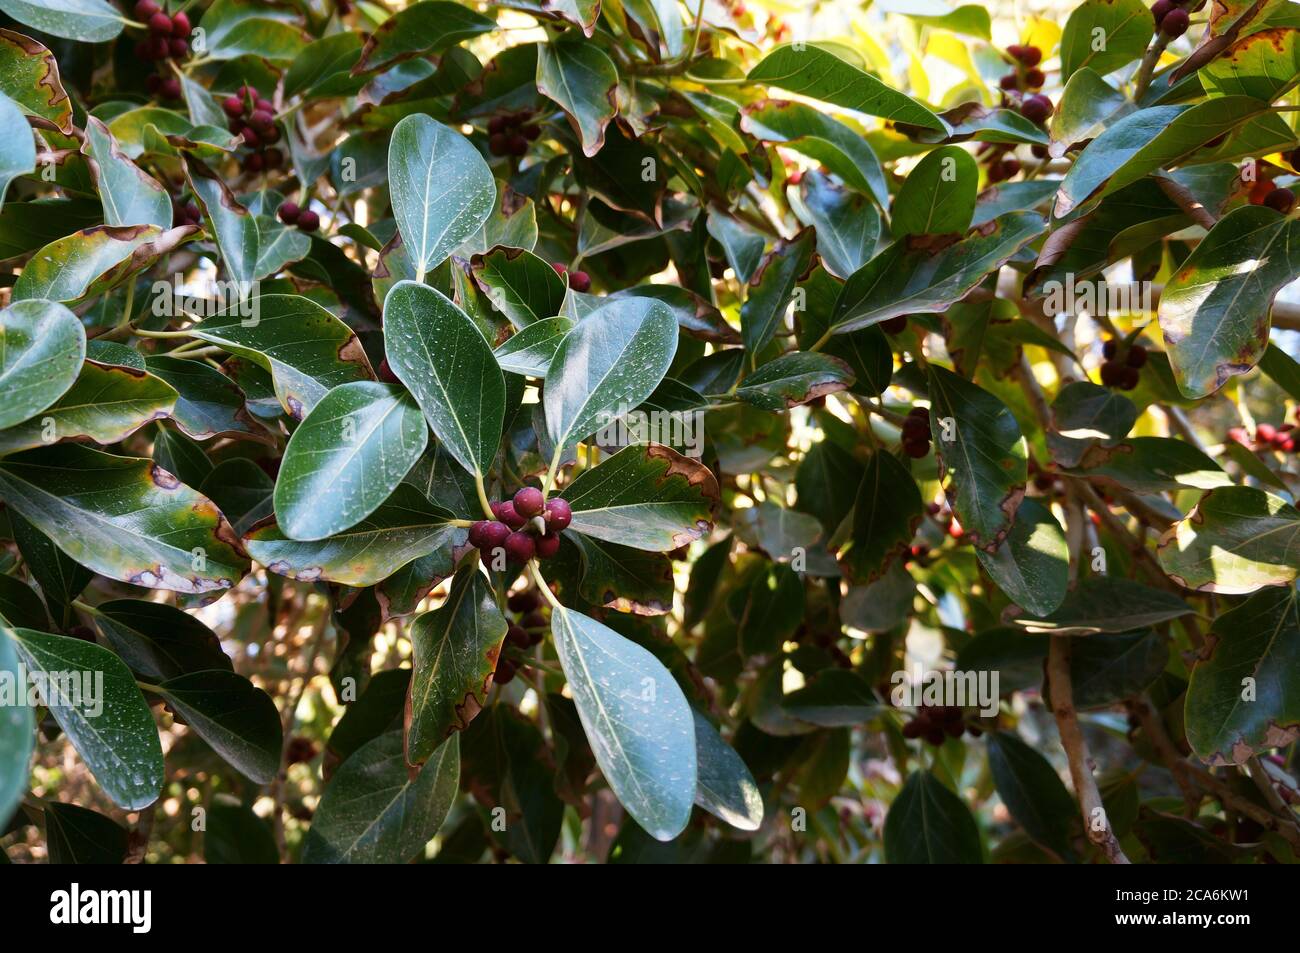 Ficus benghalensis or Banyan tree branch with red berries Stock Photo